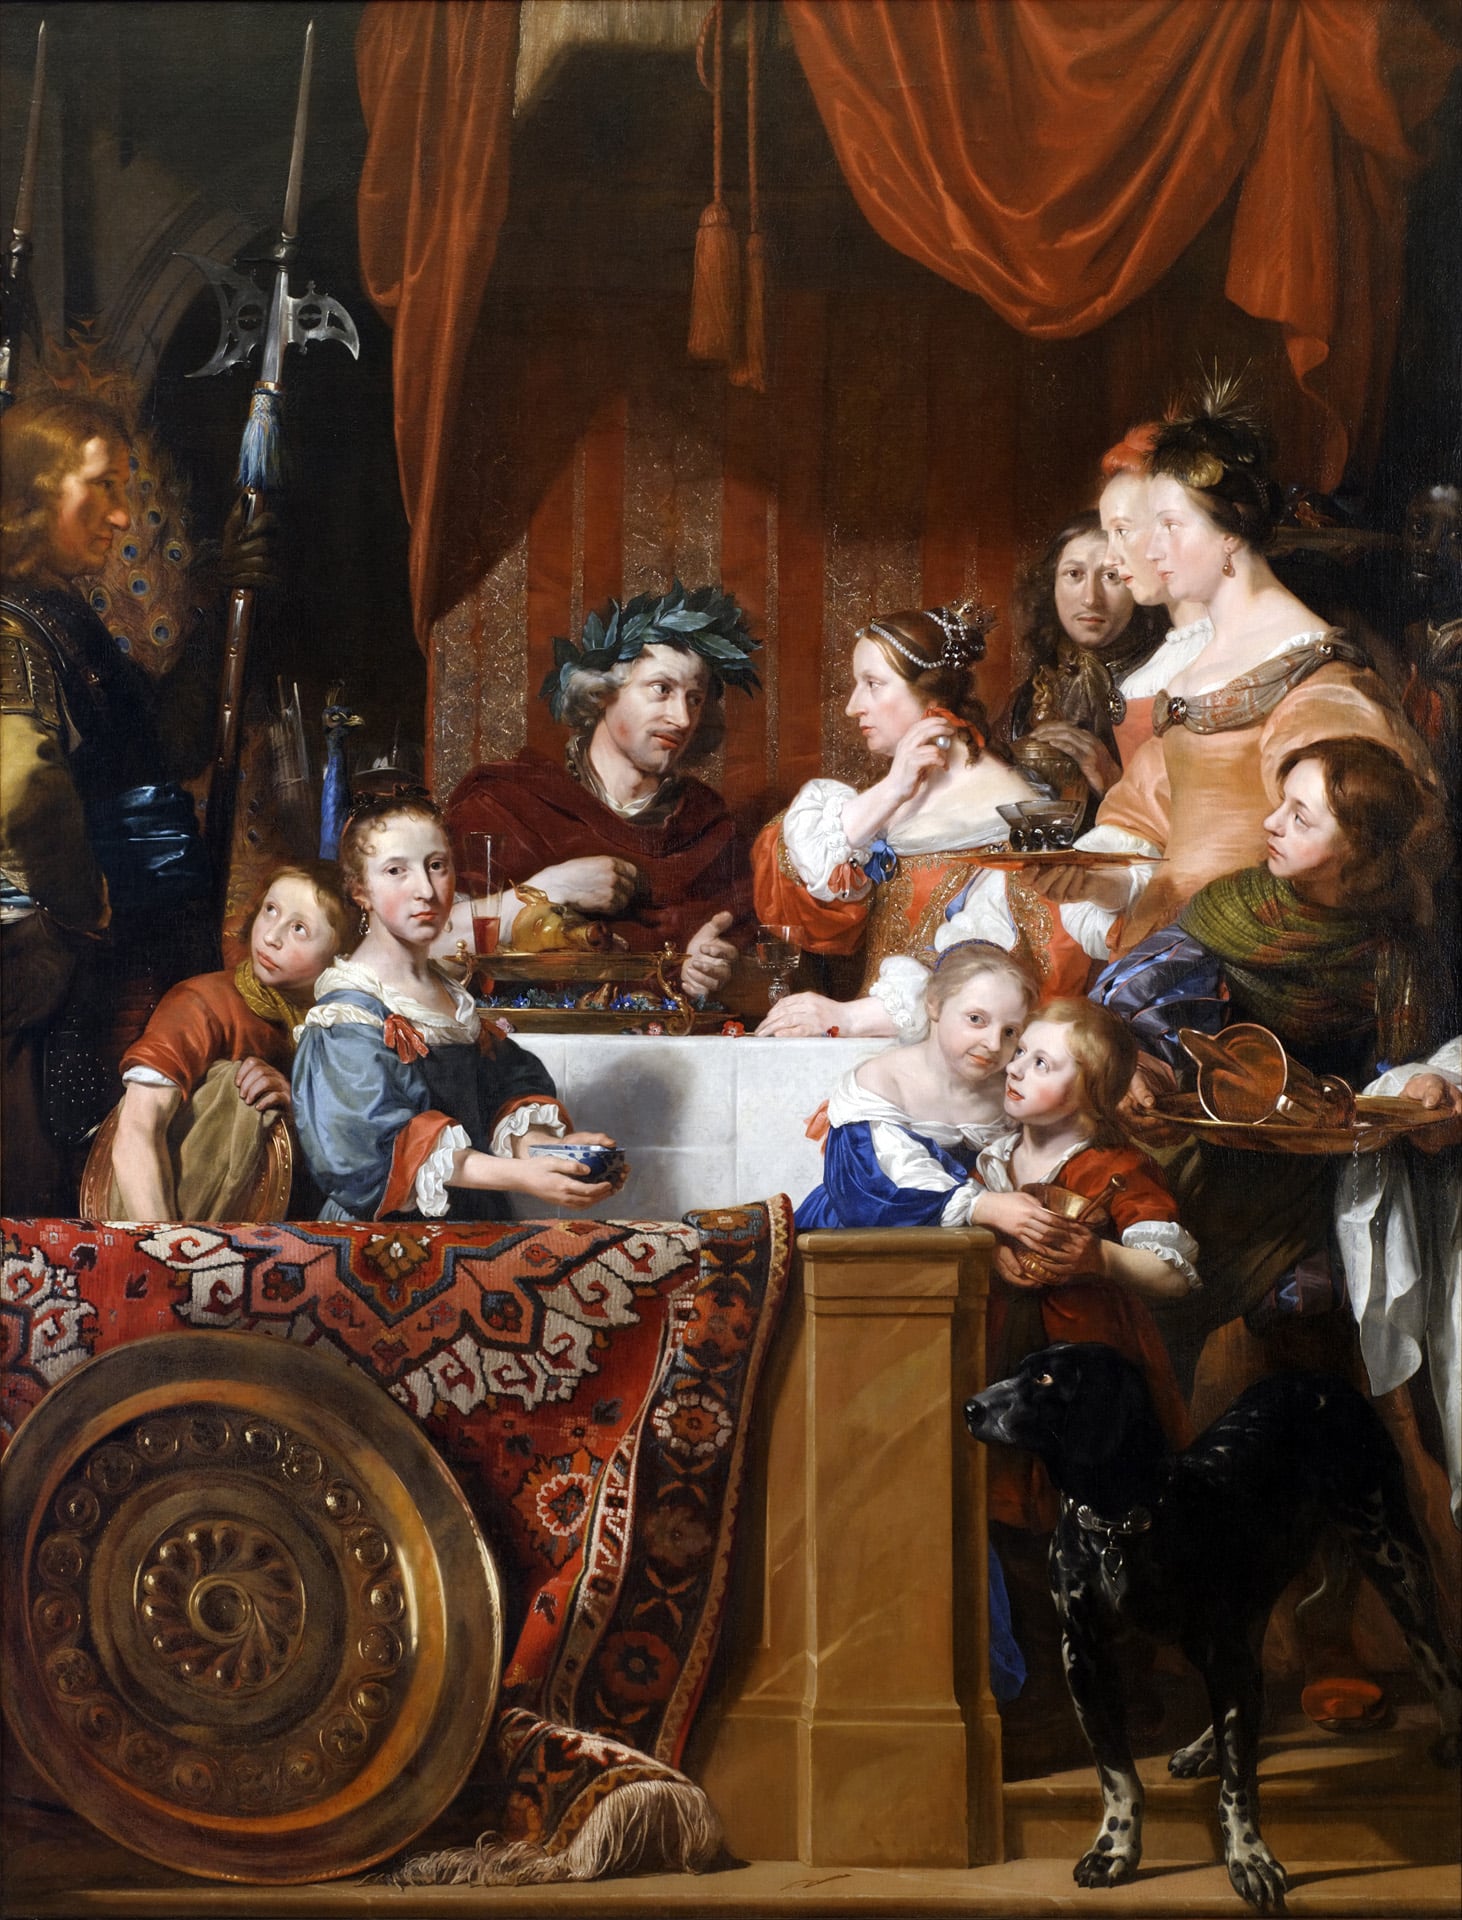 a painting of 12 people in luxuriously decorated interior dressed up in 17th century clothing eating a banquet